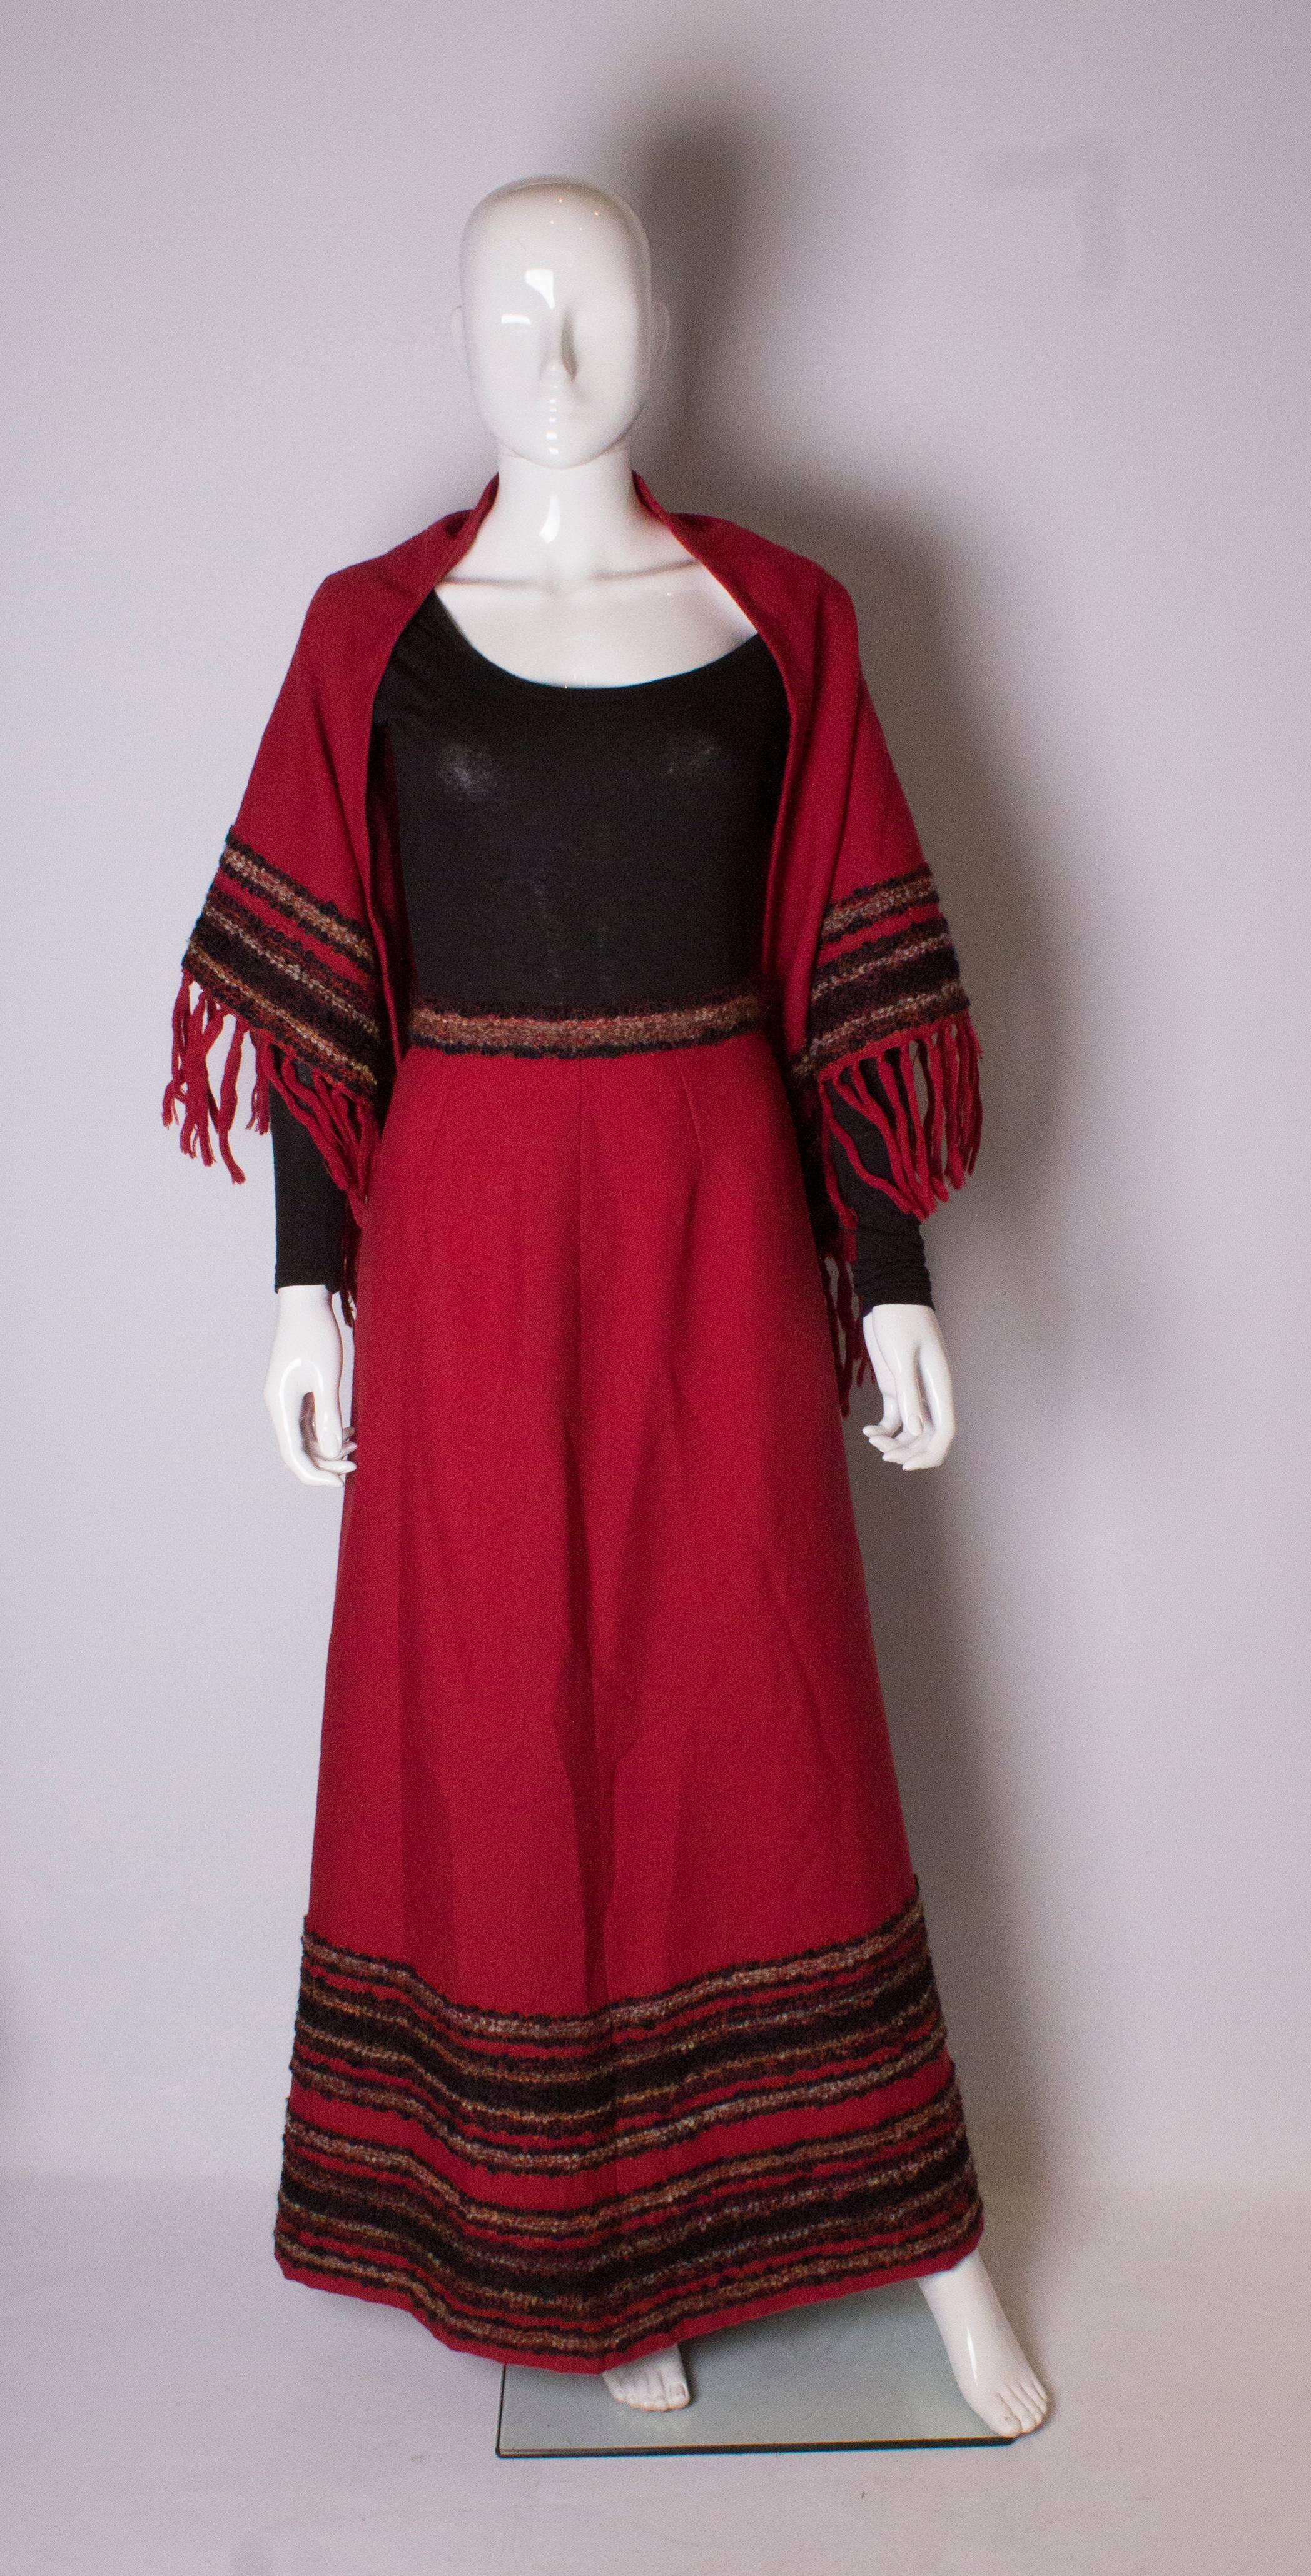 A lovely red wool mix ( 85% wool, 10% polymaid, 5% viscose)  skirt with matching shawl by Arola of Finland.
The skirt has detail on the waist band and hem, and is fully lined.
The shawl has the same detail.